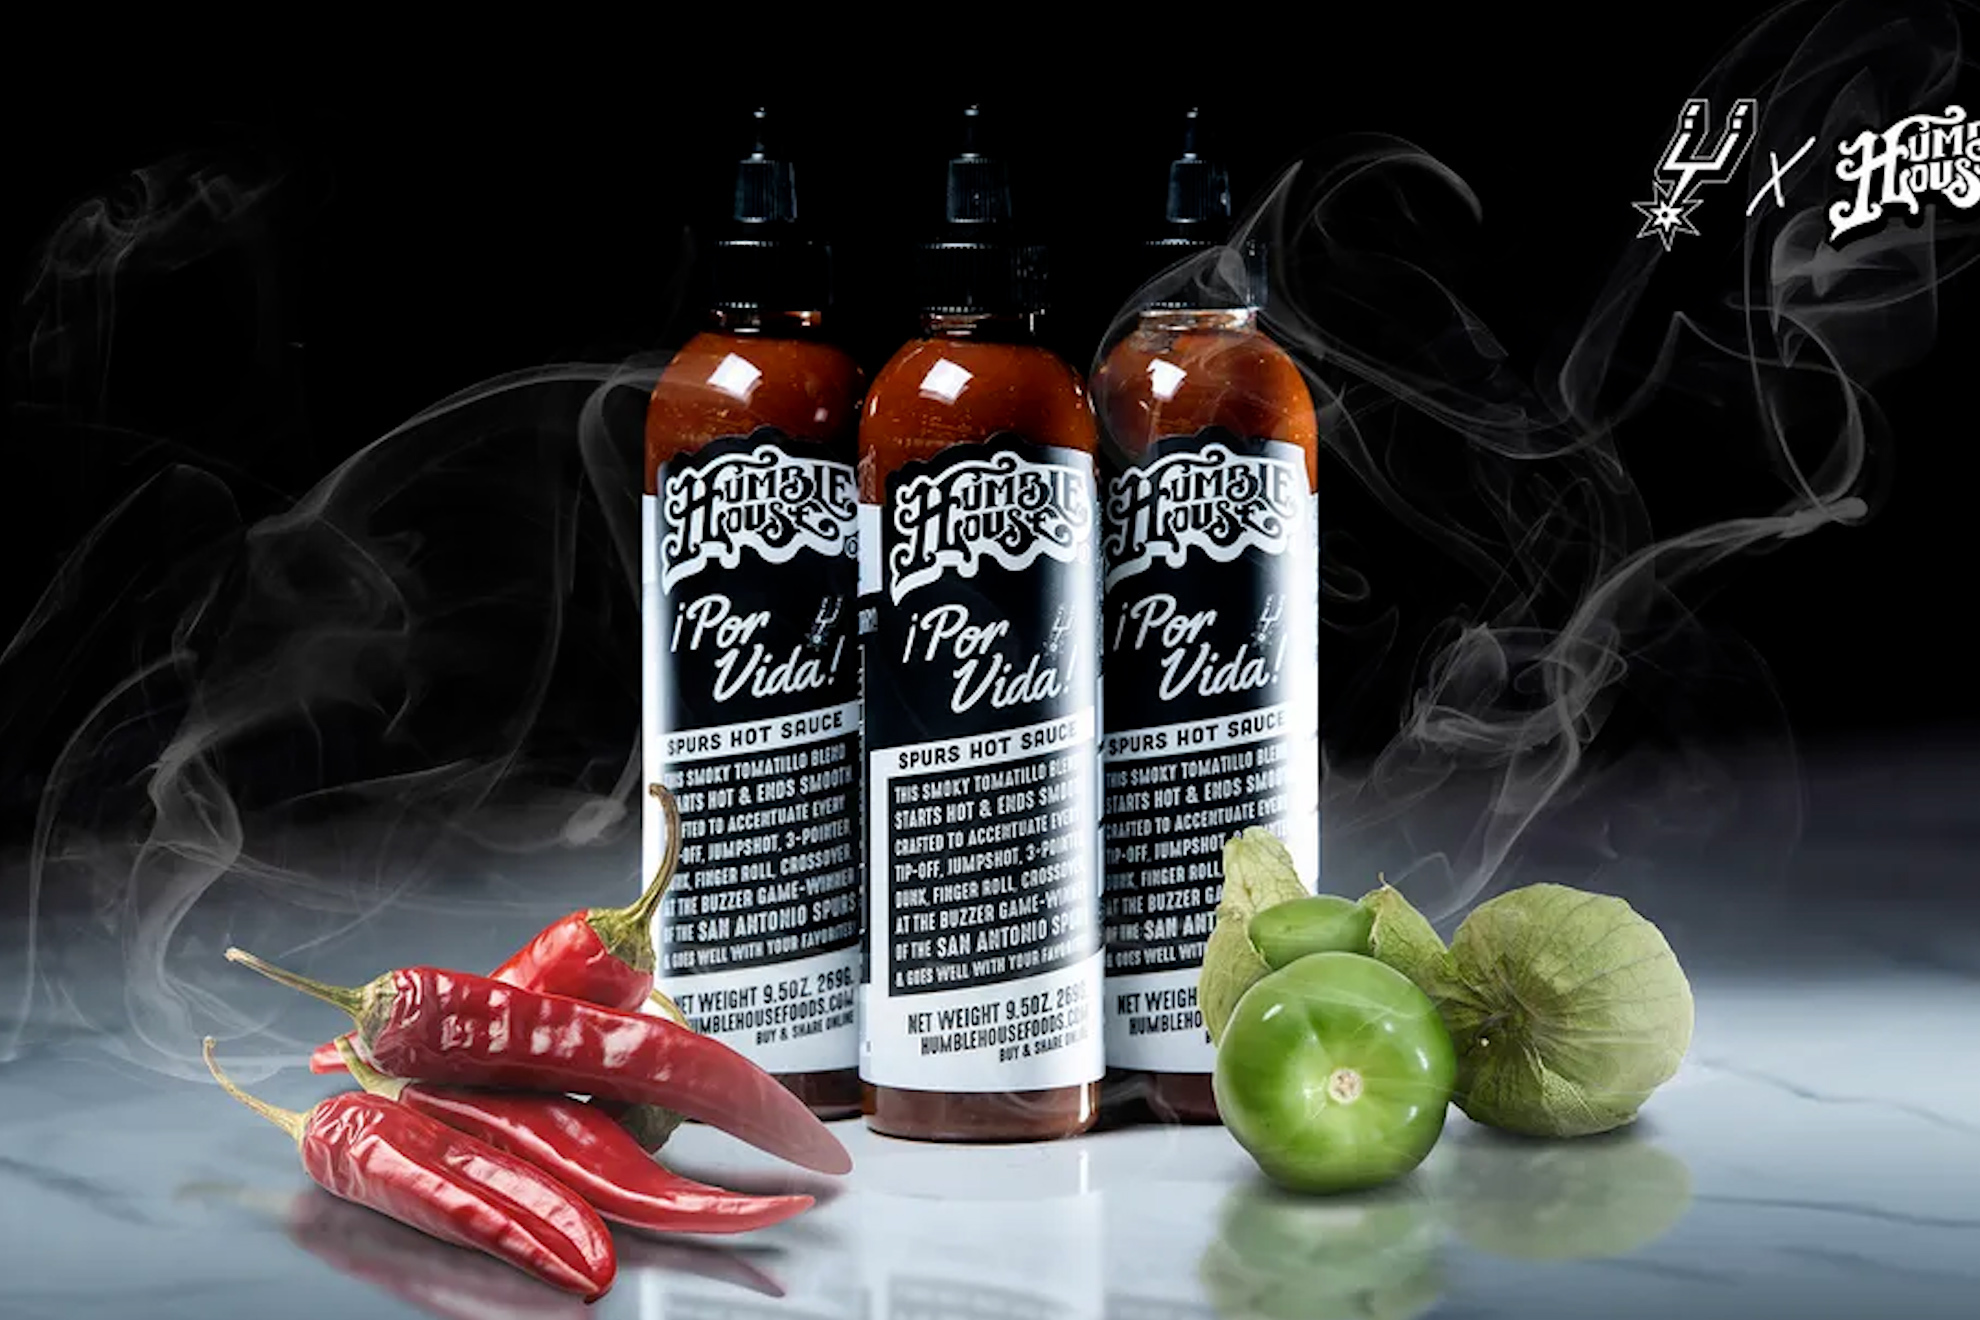 The Spurs have created the Por Vida hot sauce, claiming it represents their culture. Does it?